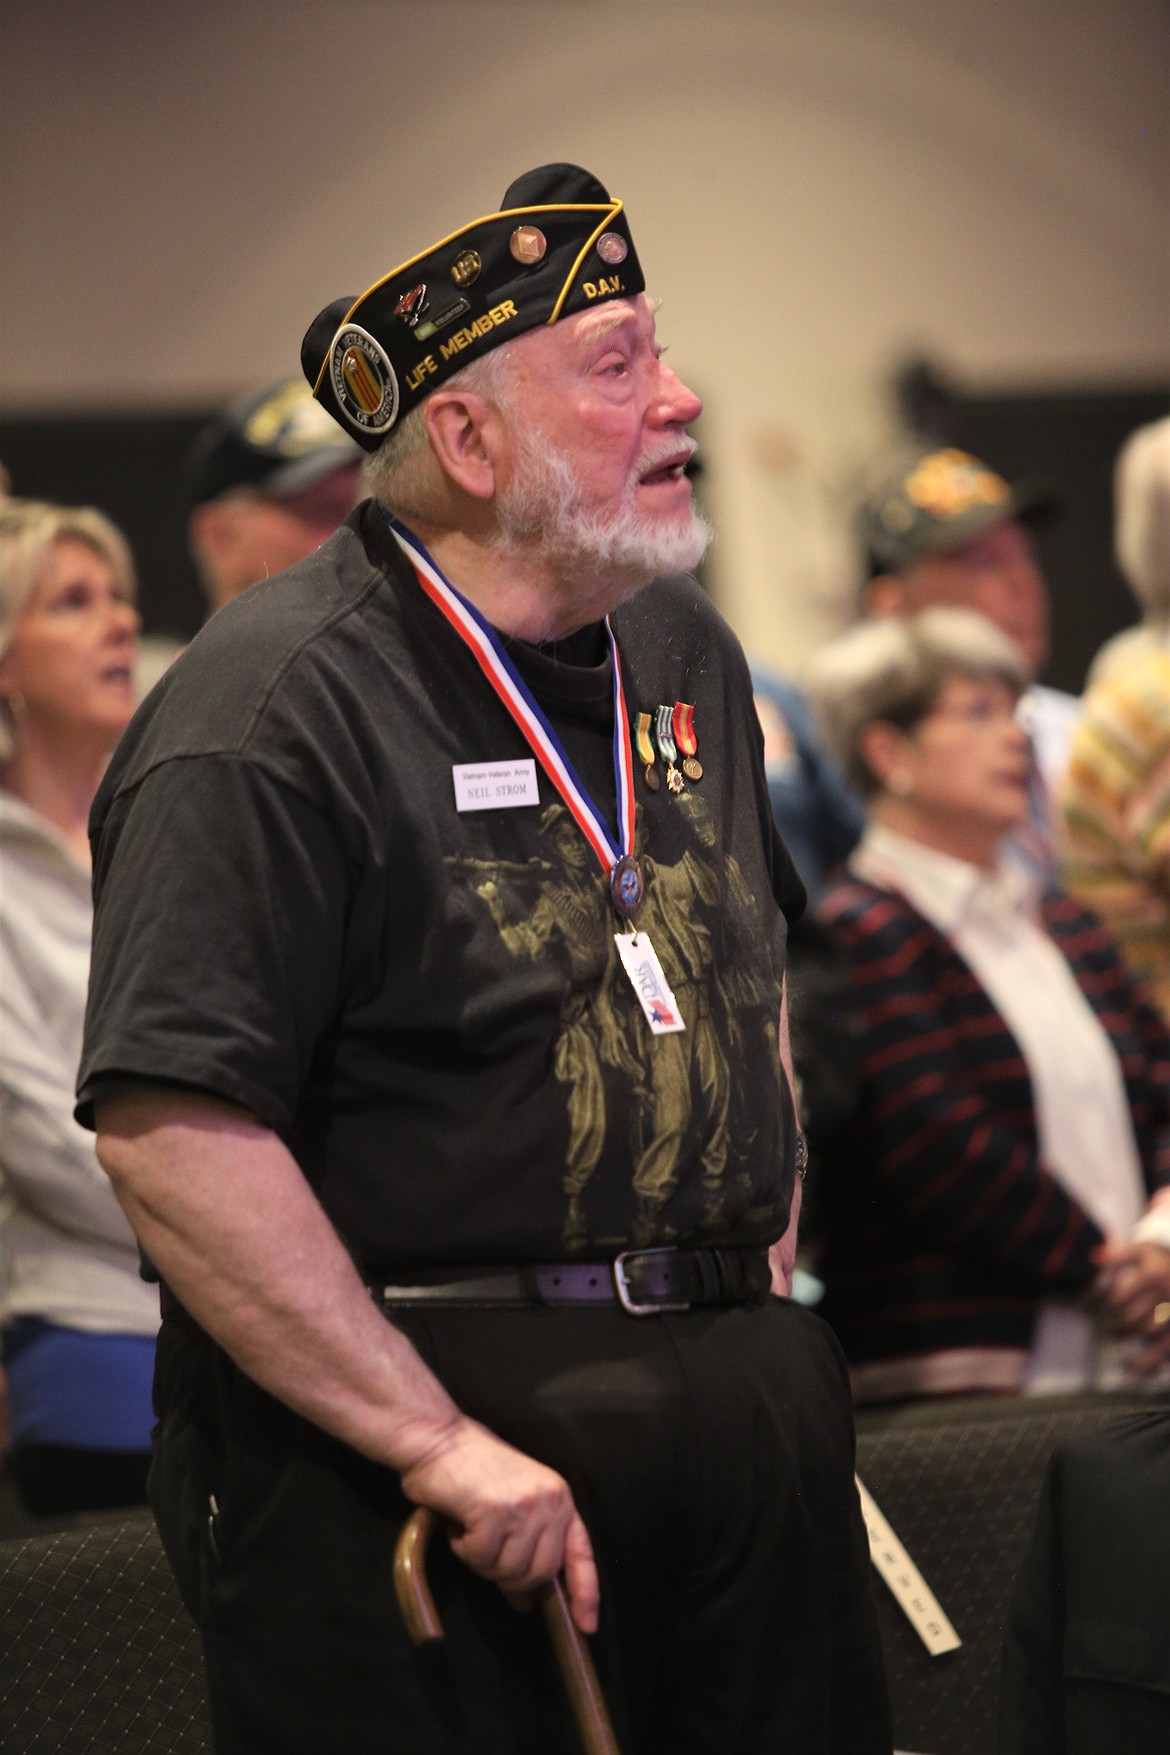 Vietnam War veteran Neil Strom sings the Star Spangled Banner with others at Candlelight Christian Fellowship on Tuesday.